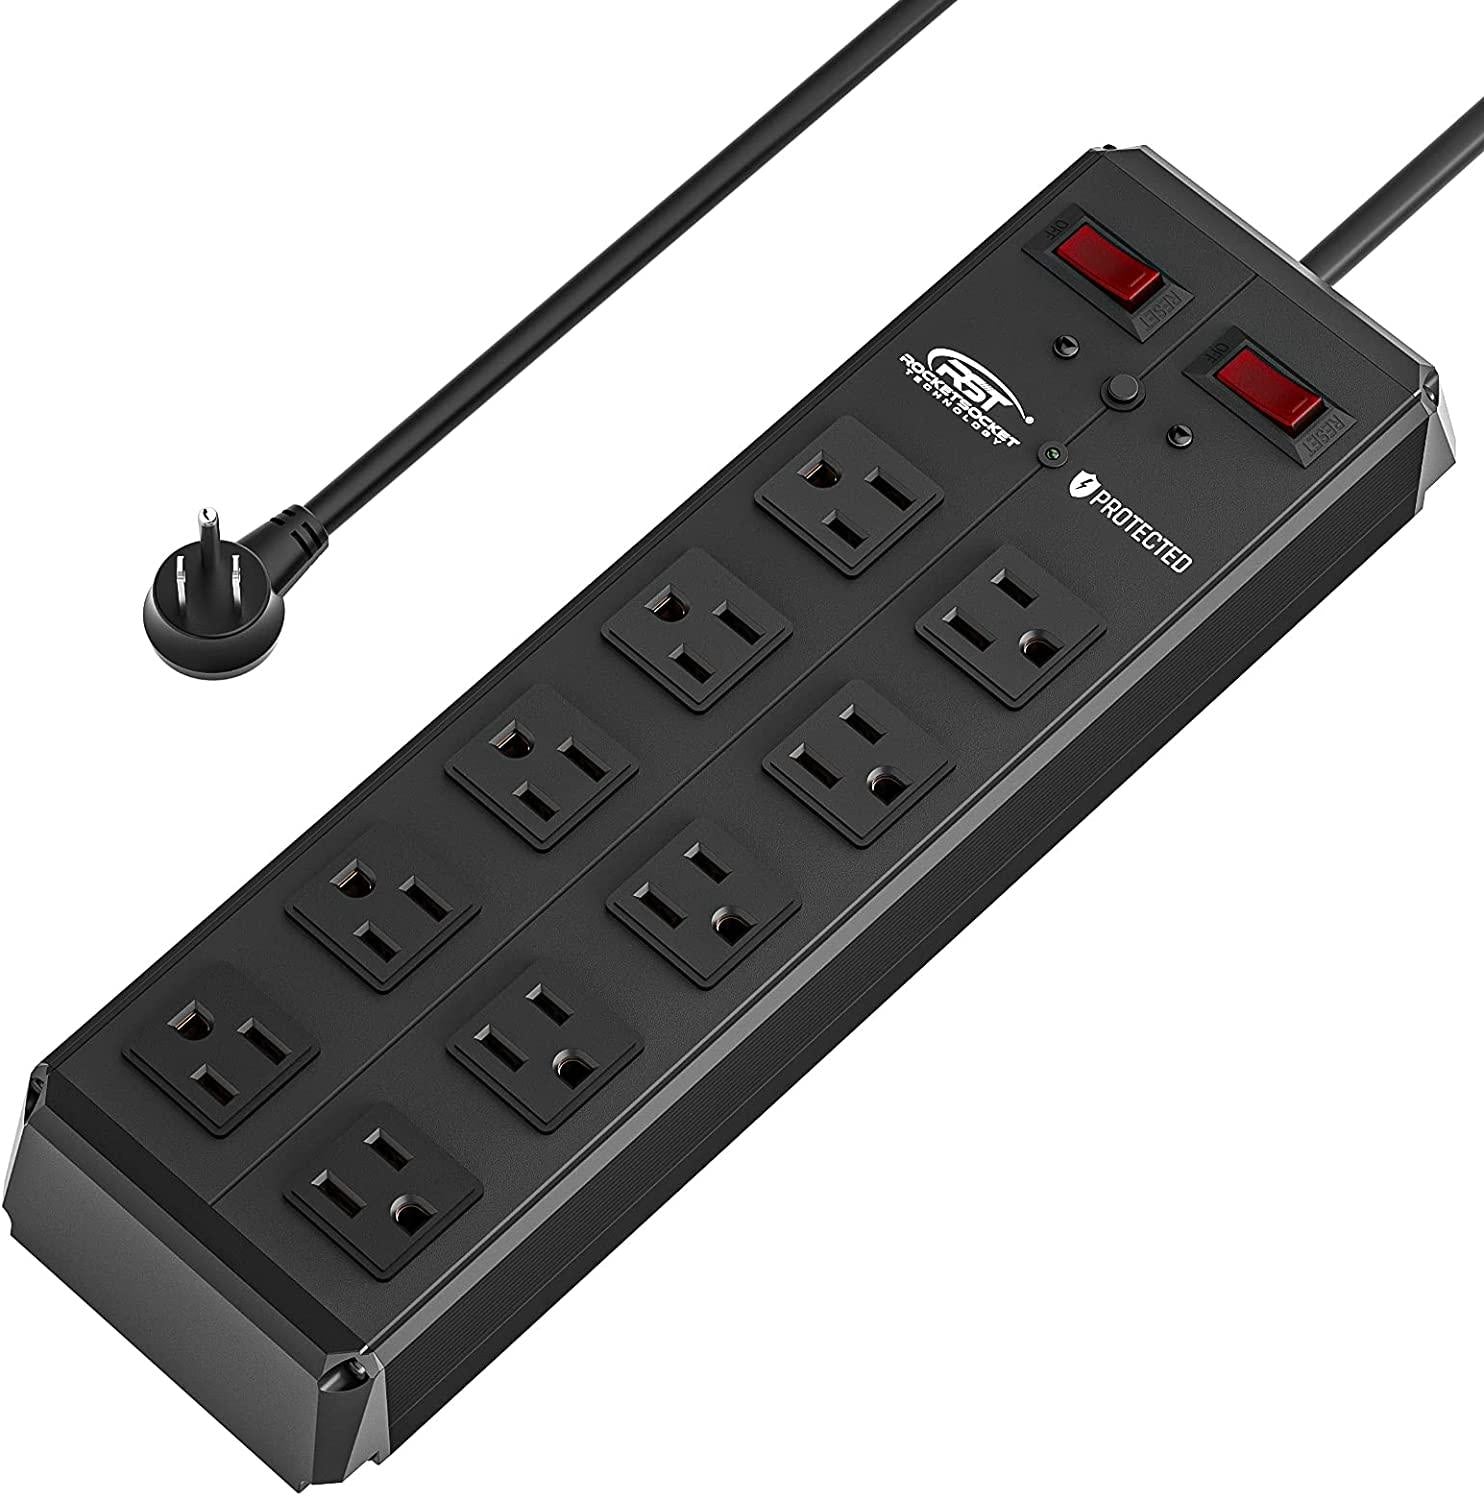 CRST 10 Outlets 1020Joules Heavy Duty Metal Power Strip Surge Protector, 9ft Flat Plug Power Cord